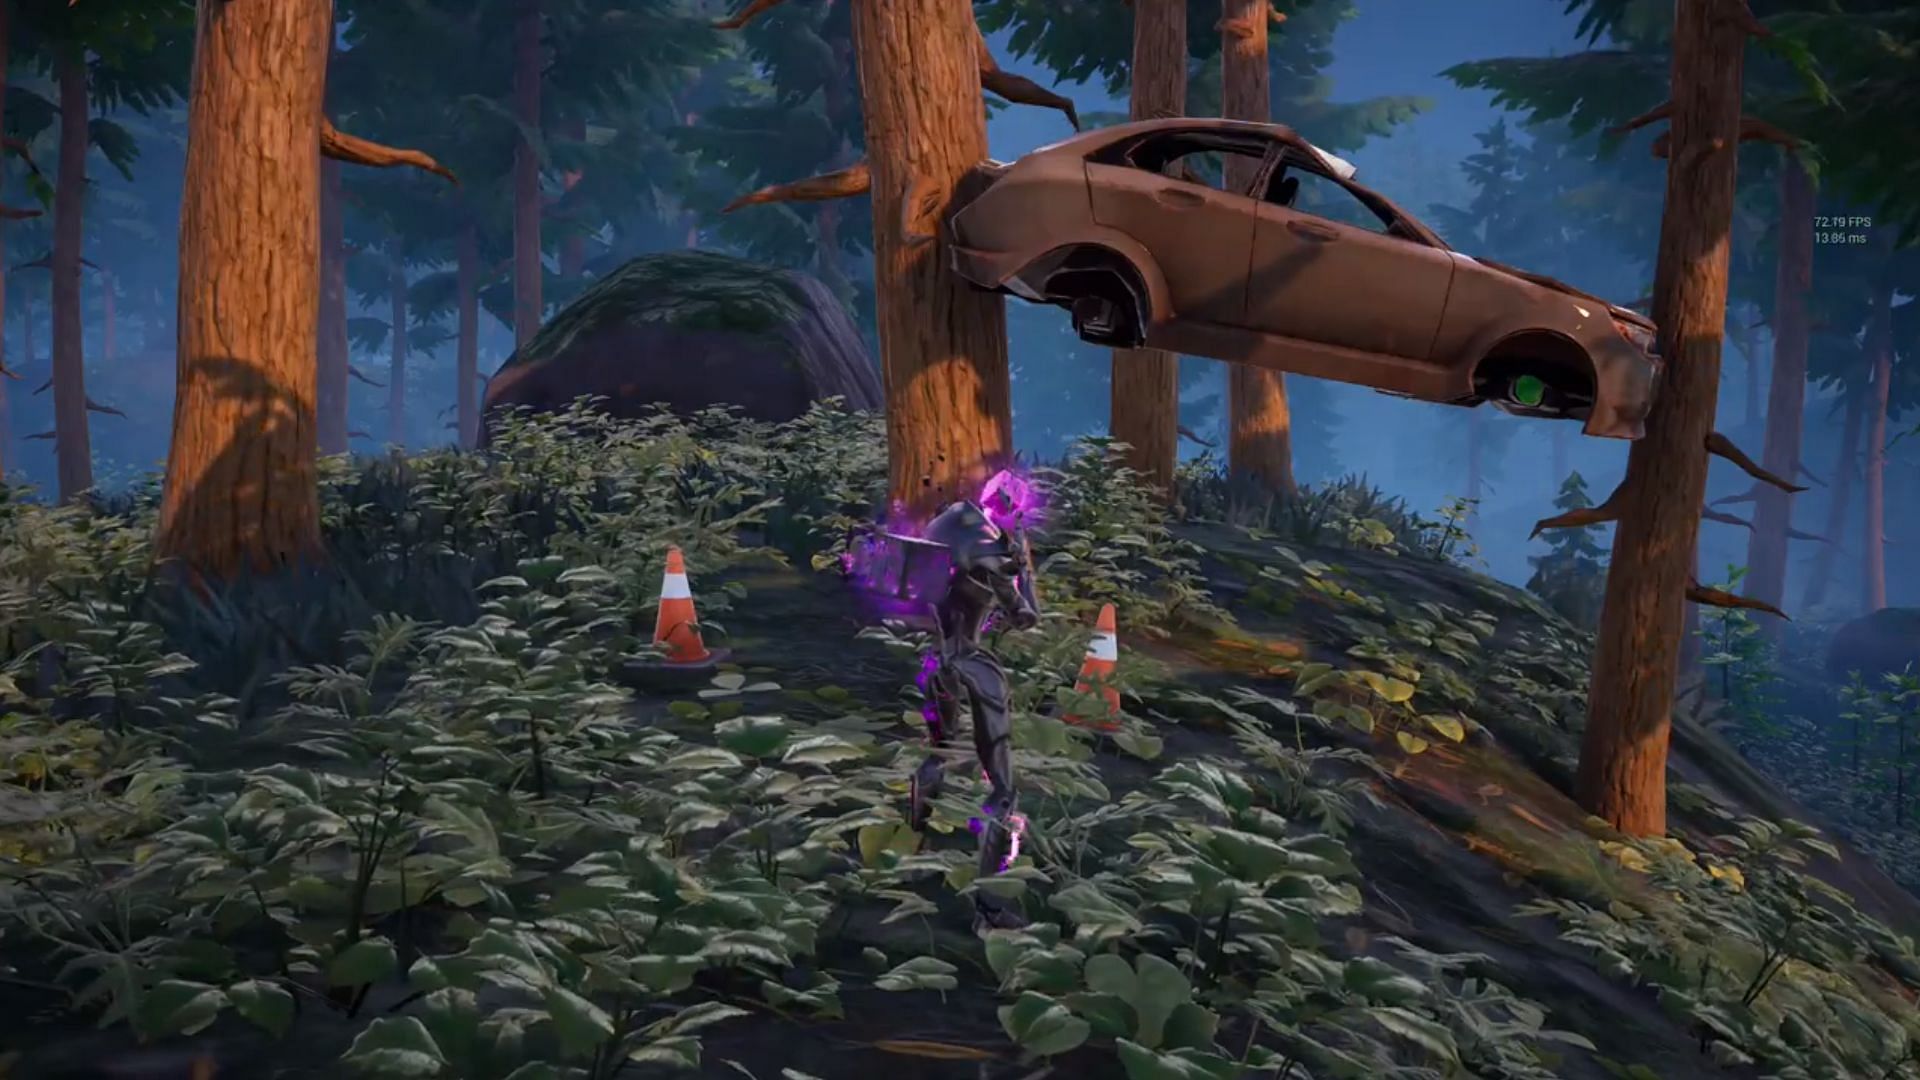 &quot;History repeats itself&quot;: Fortnite player gets their car stuck between two trees, community wants it memorialized